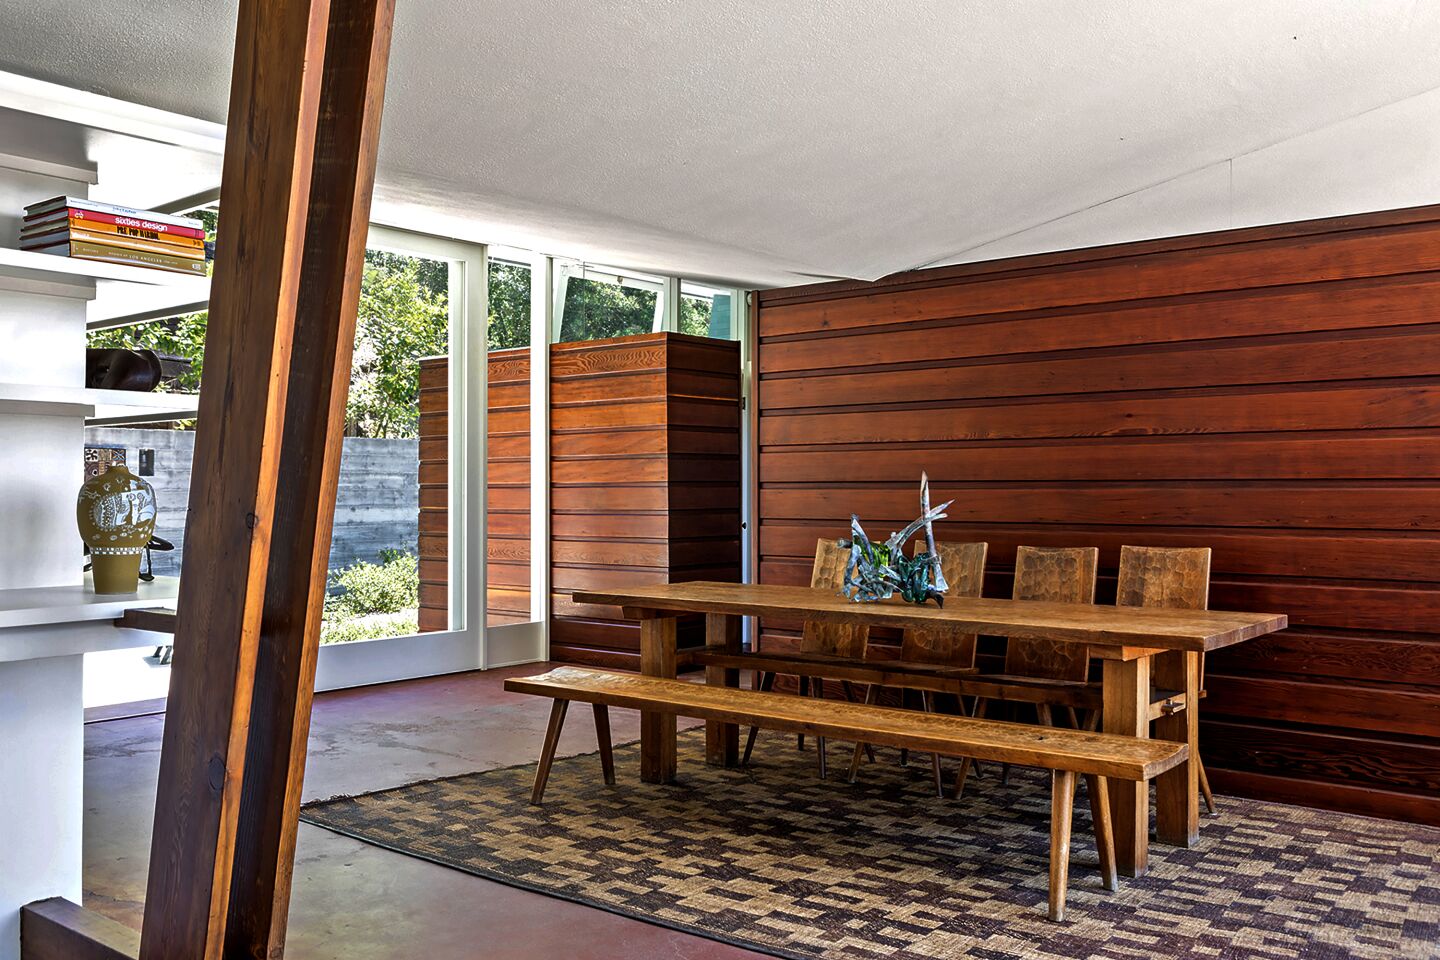 AFTER - DINING ROOM A once-forgotten, John Lautner-designed home in Echo Park has been reborn thanks to its new owner, fashion designer Trina Turk.